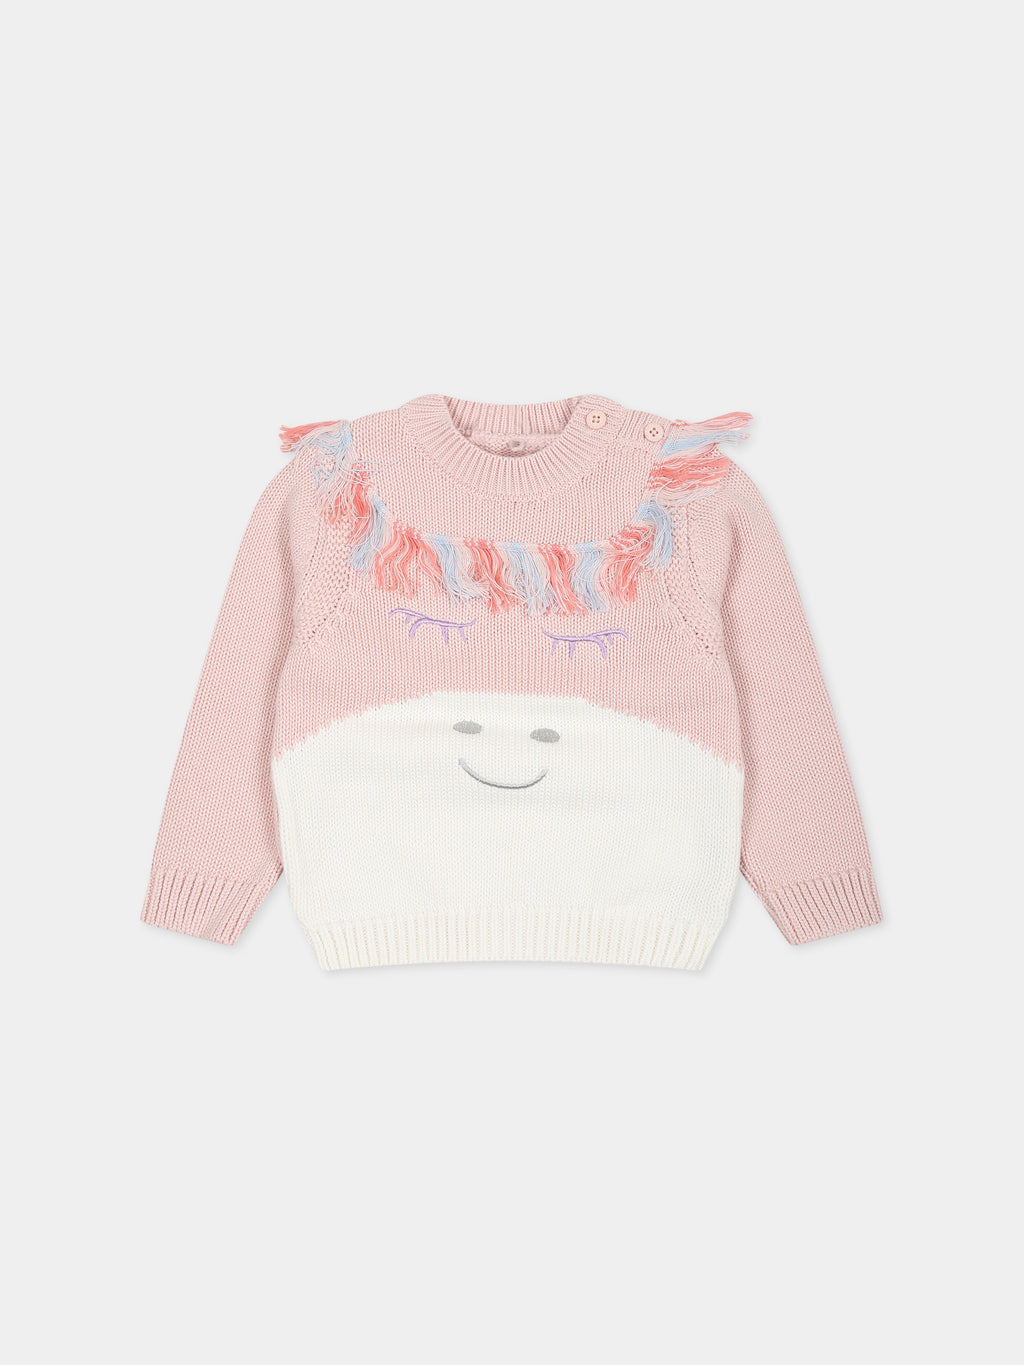 Pink sweater for baby girl with unicorn